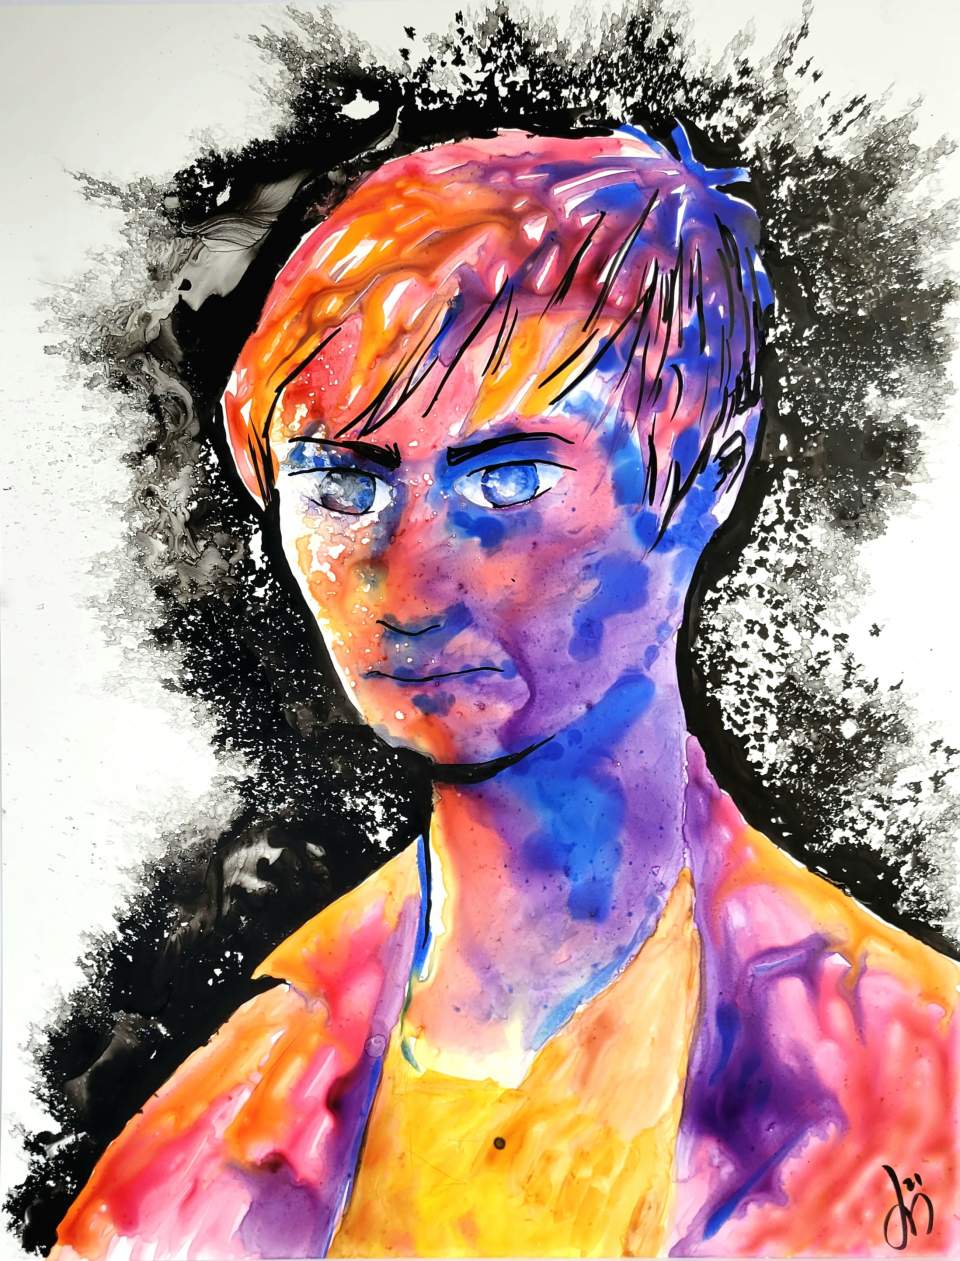 An India ink painting of a serious young man named Jarock